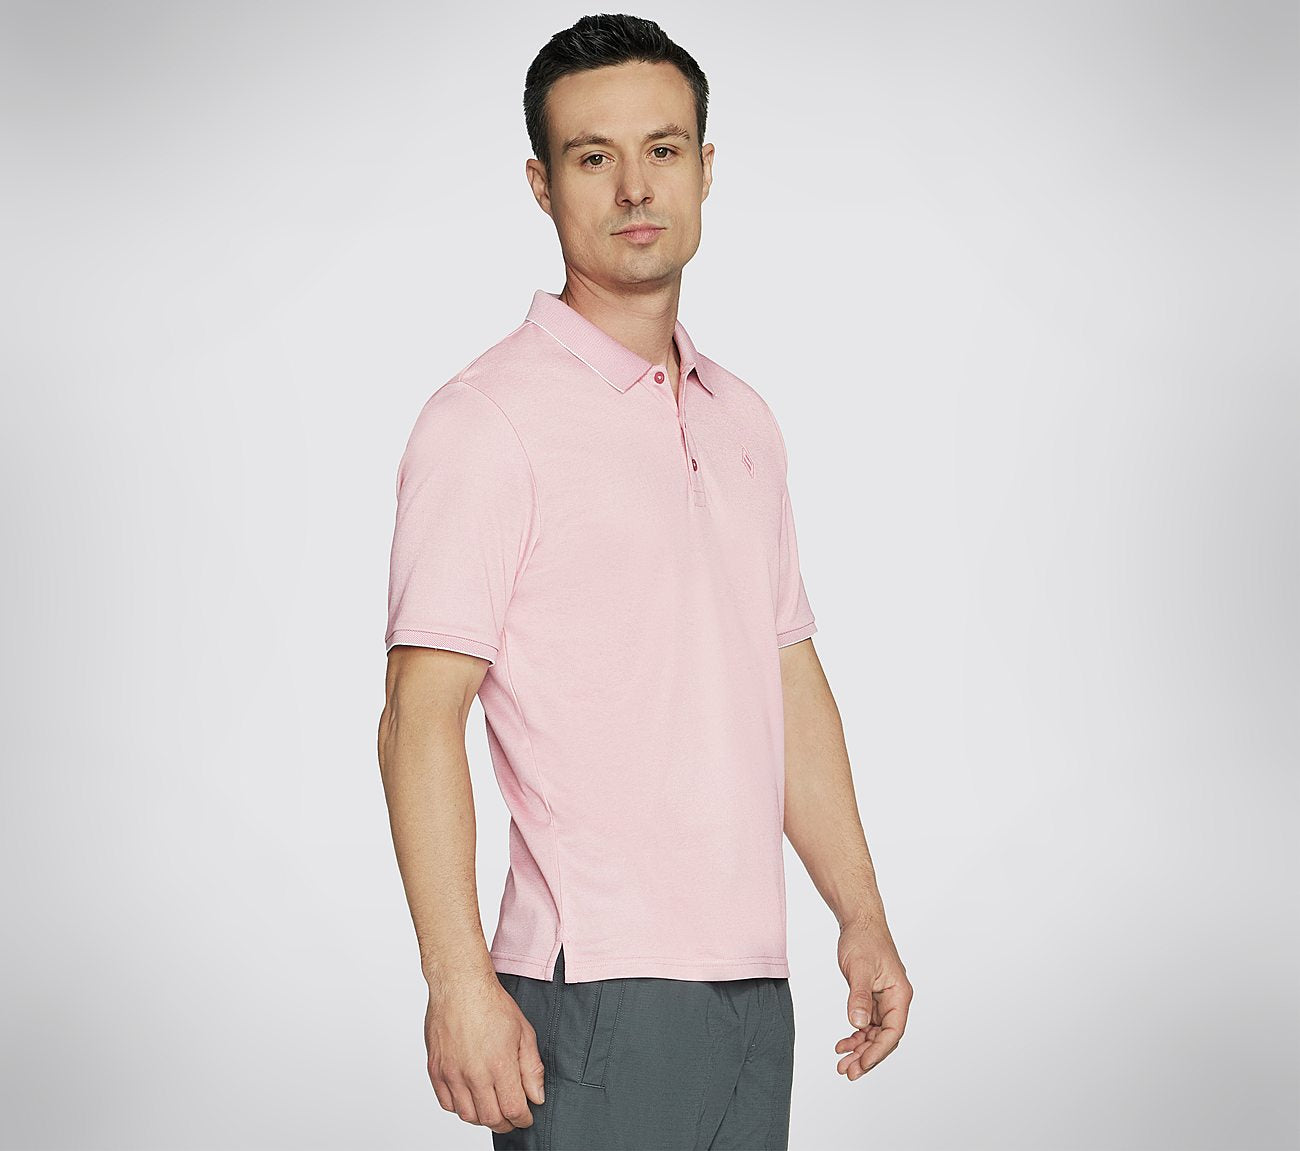 Off Duty Polo Clothes Skechers